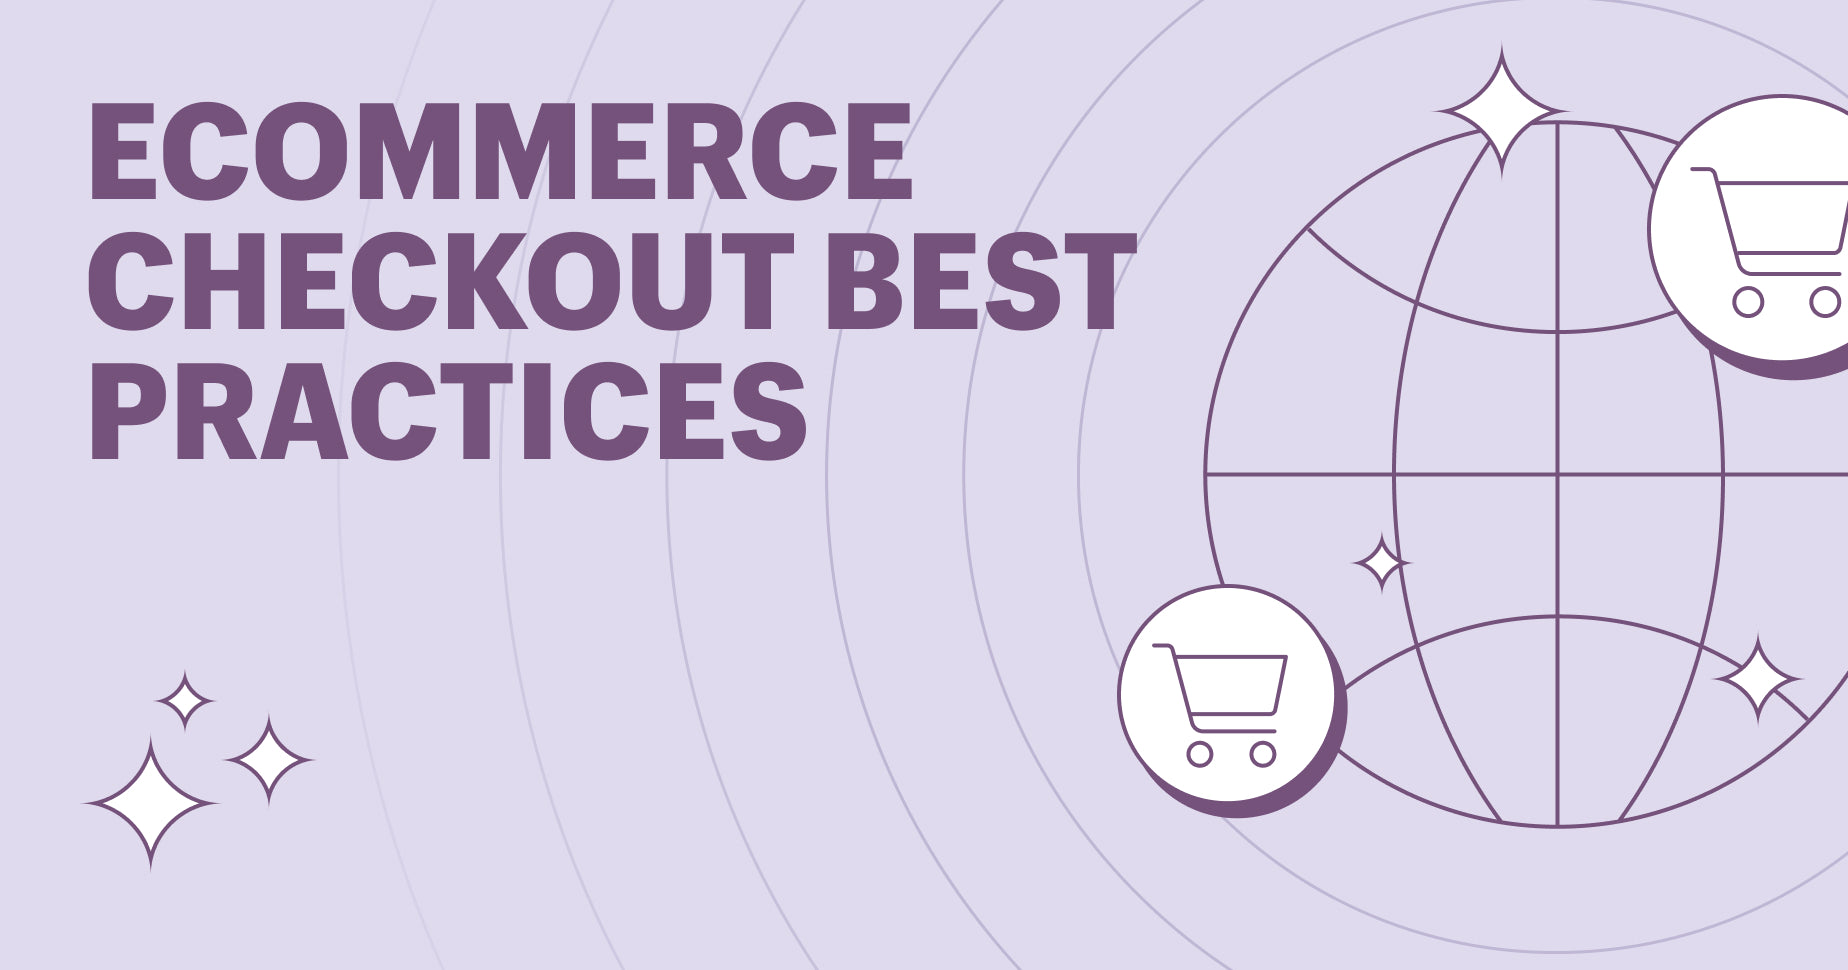 Ecommerce_20Checkout_20Best_20Practices.jpg